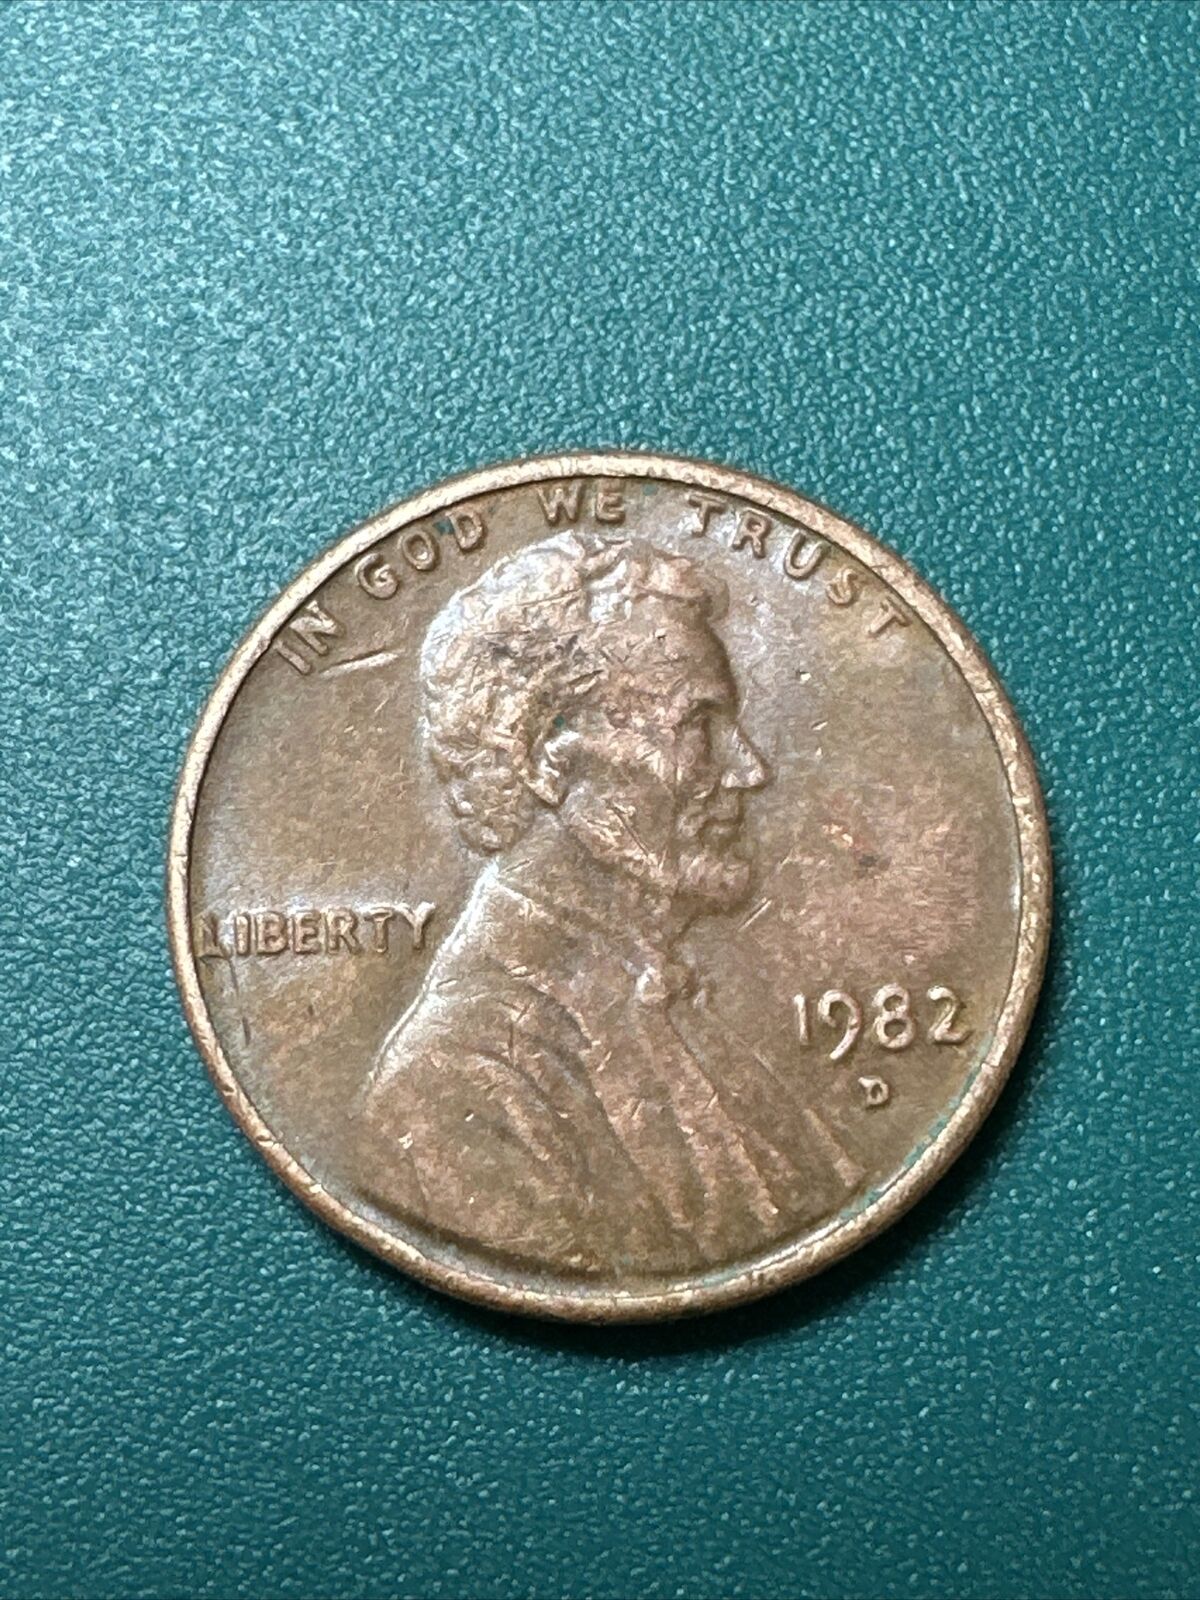 Rare 1982 d penny 3.1 grams Small Date Doubledie#1040 Shipped Free Next Day Air